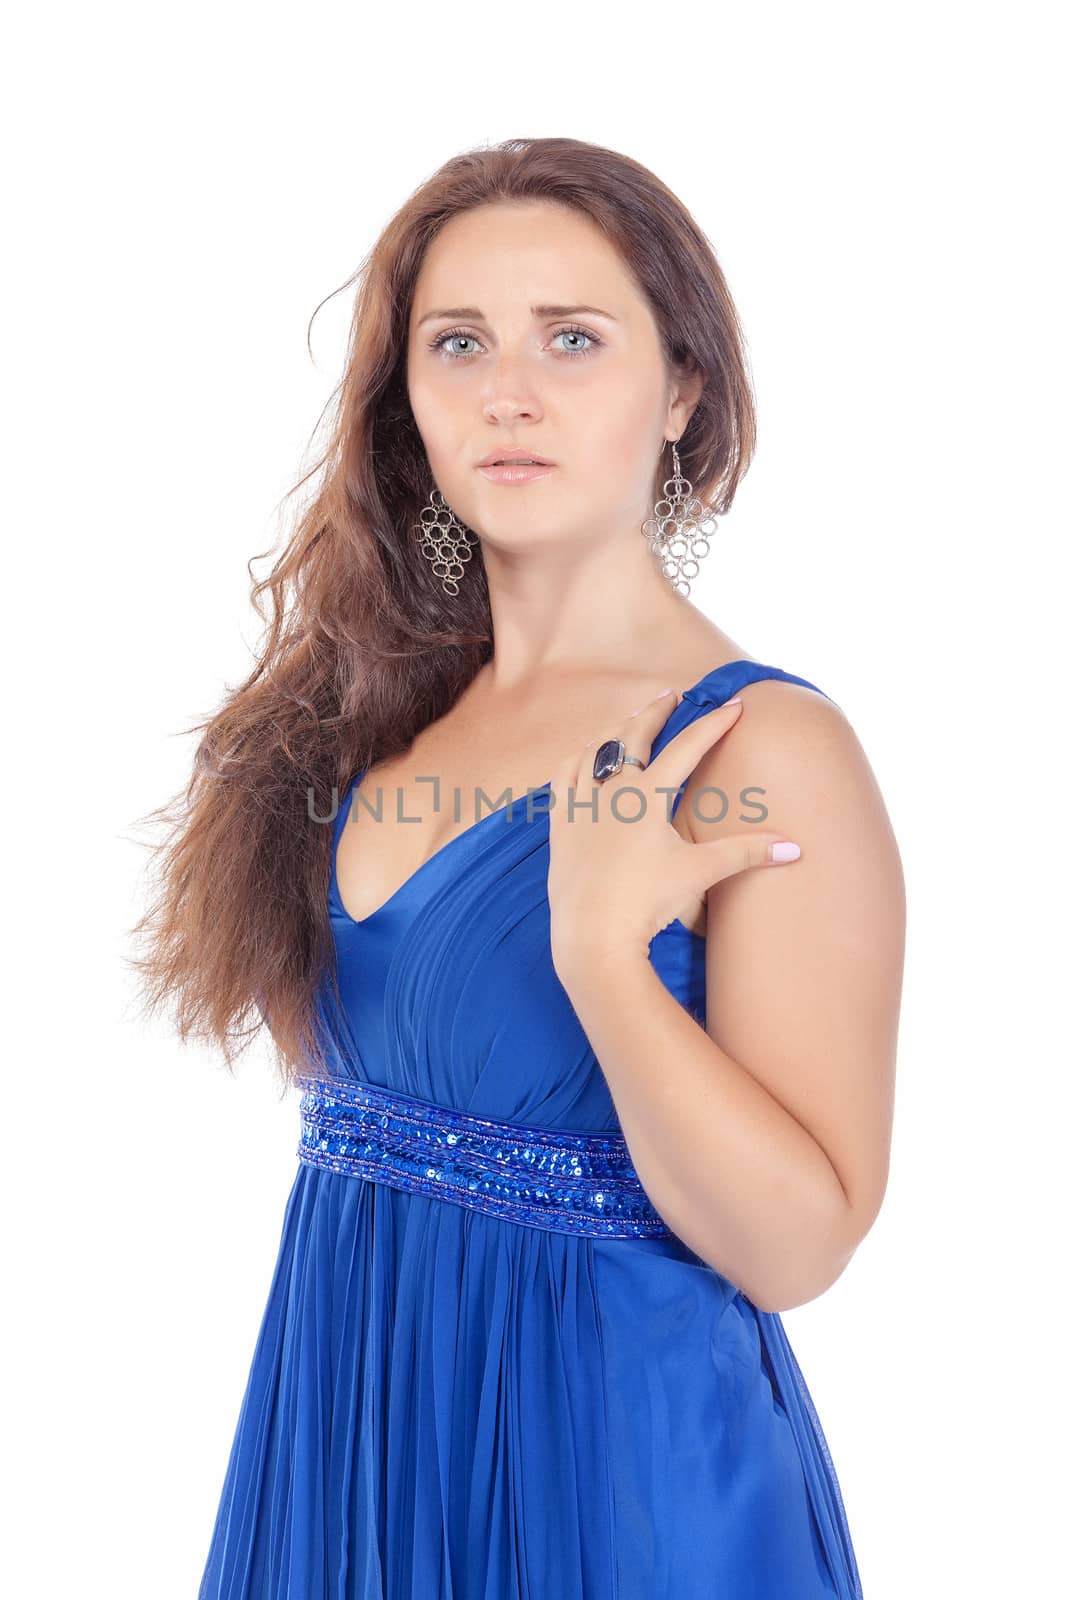 Portrait of a beautiful young woman in blue dress by Discovod